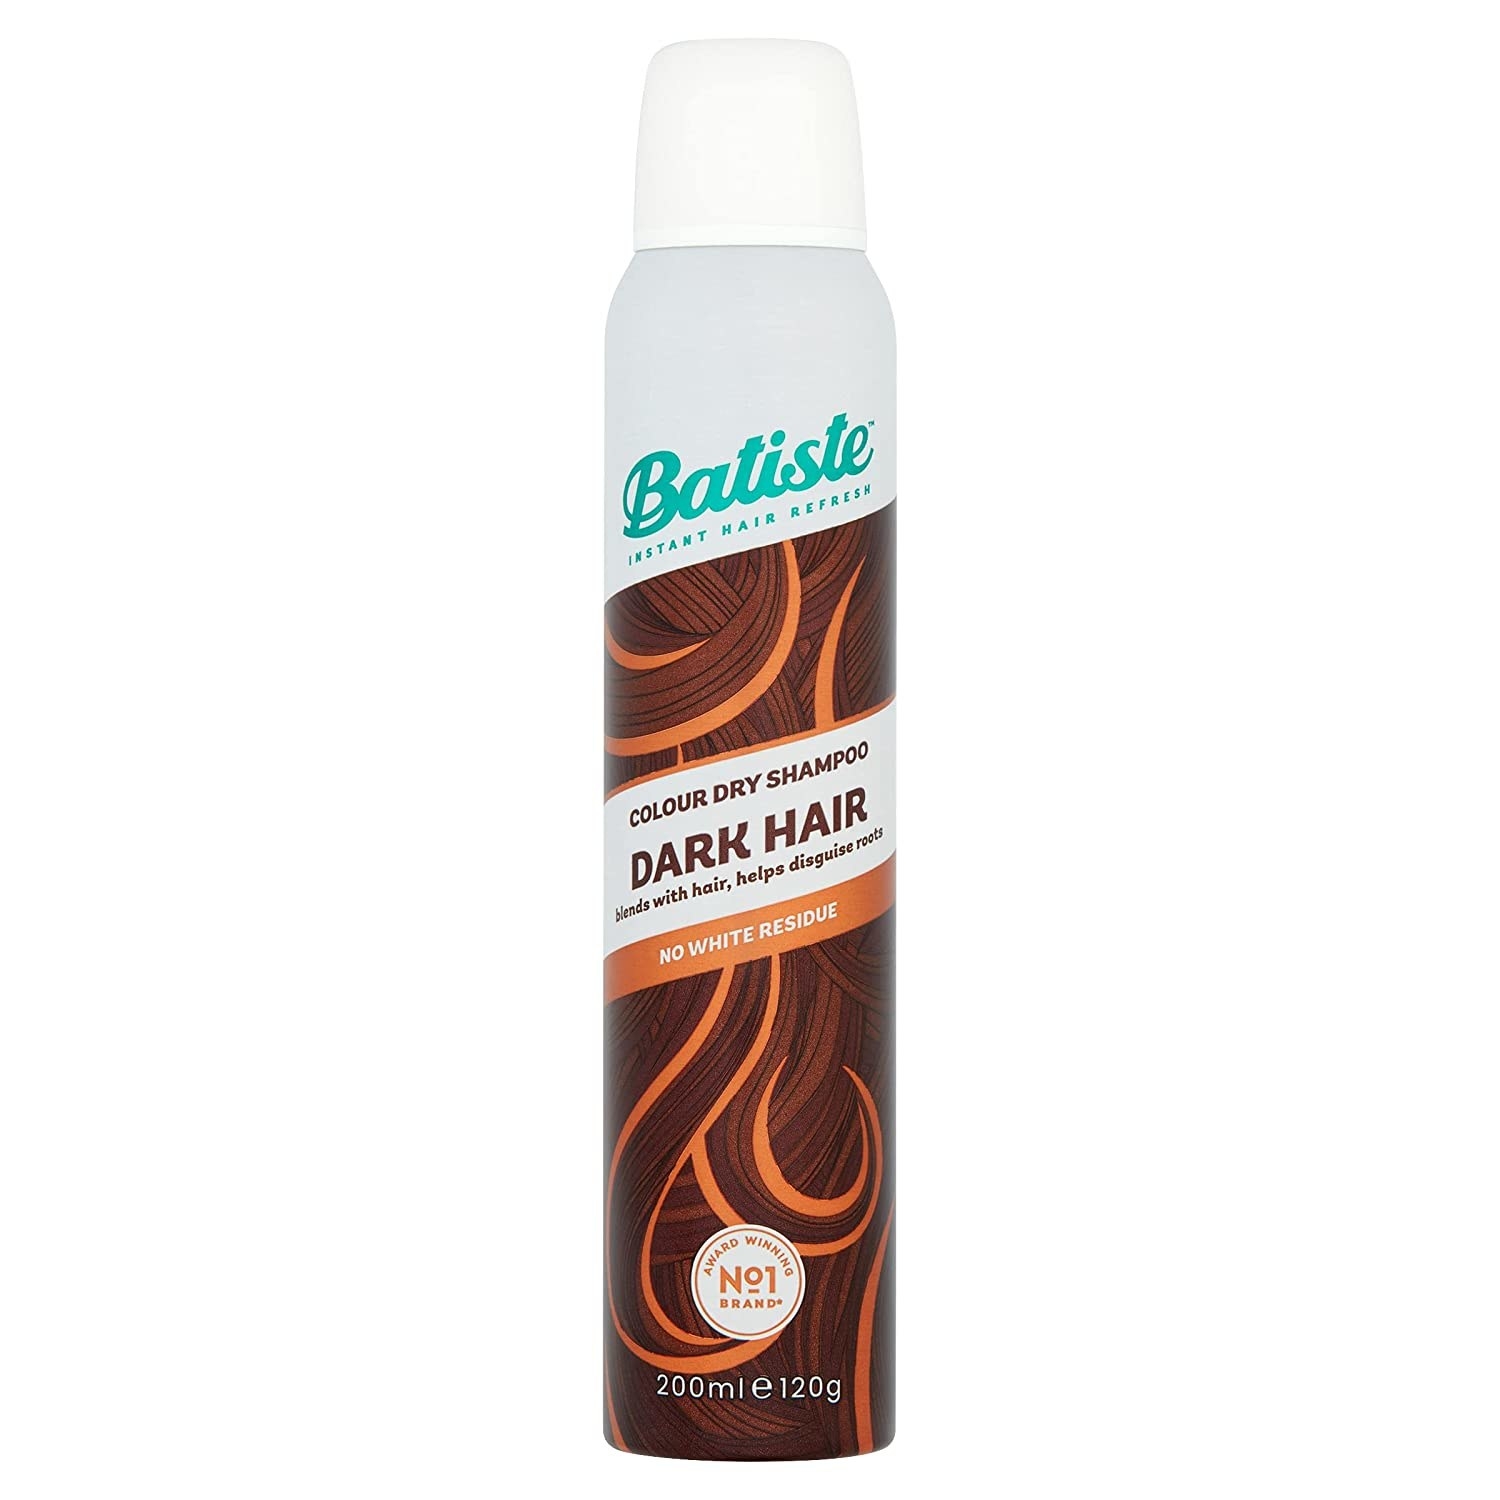 A white and brown spray bottle of Batiste dry shampoo. 